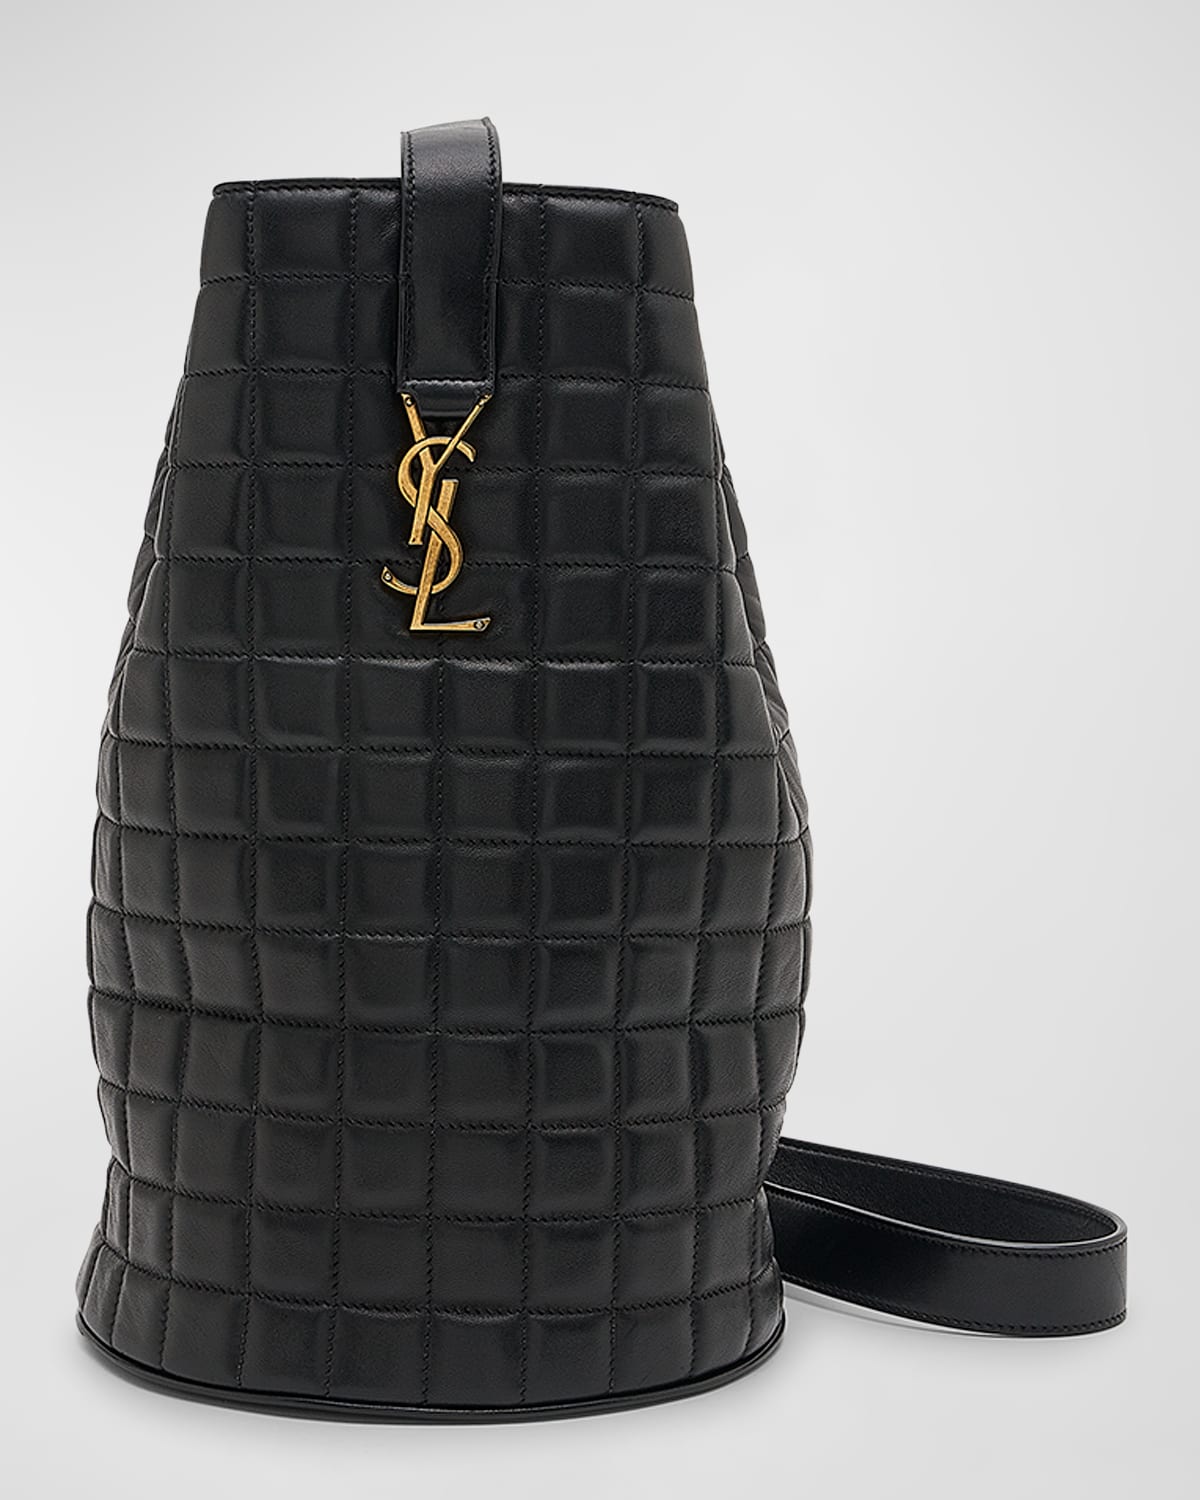 Cecile Medium YSL Bucket Bag in Quilted Smooth Leather